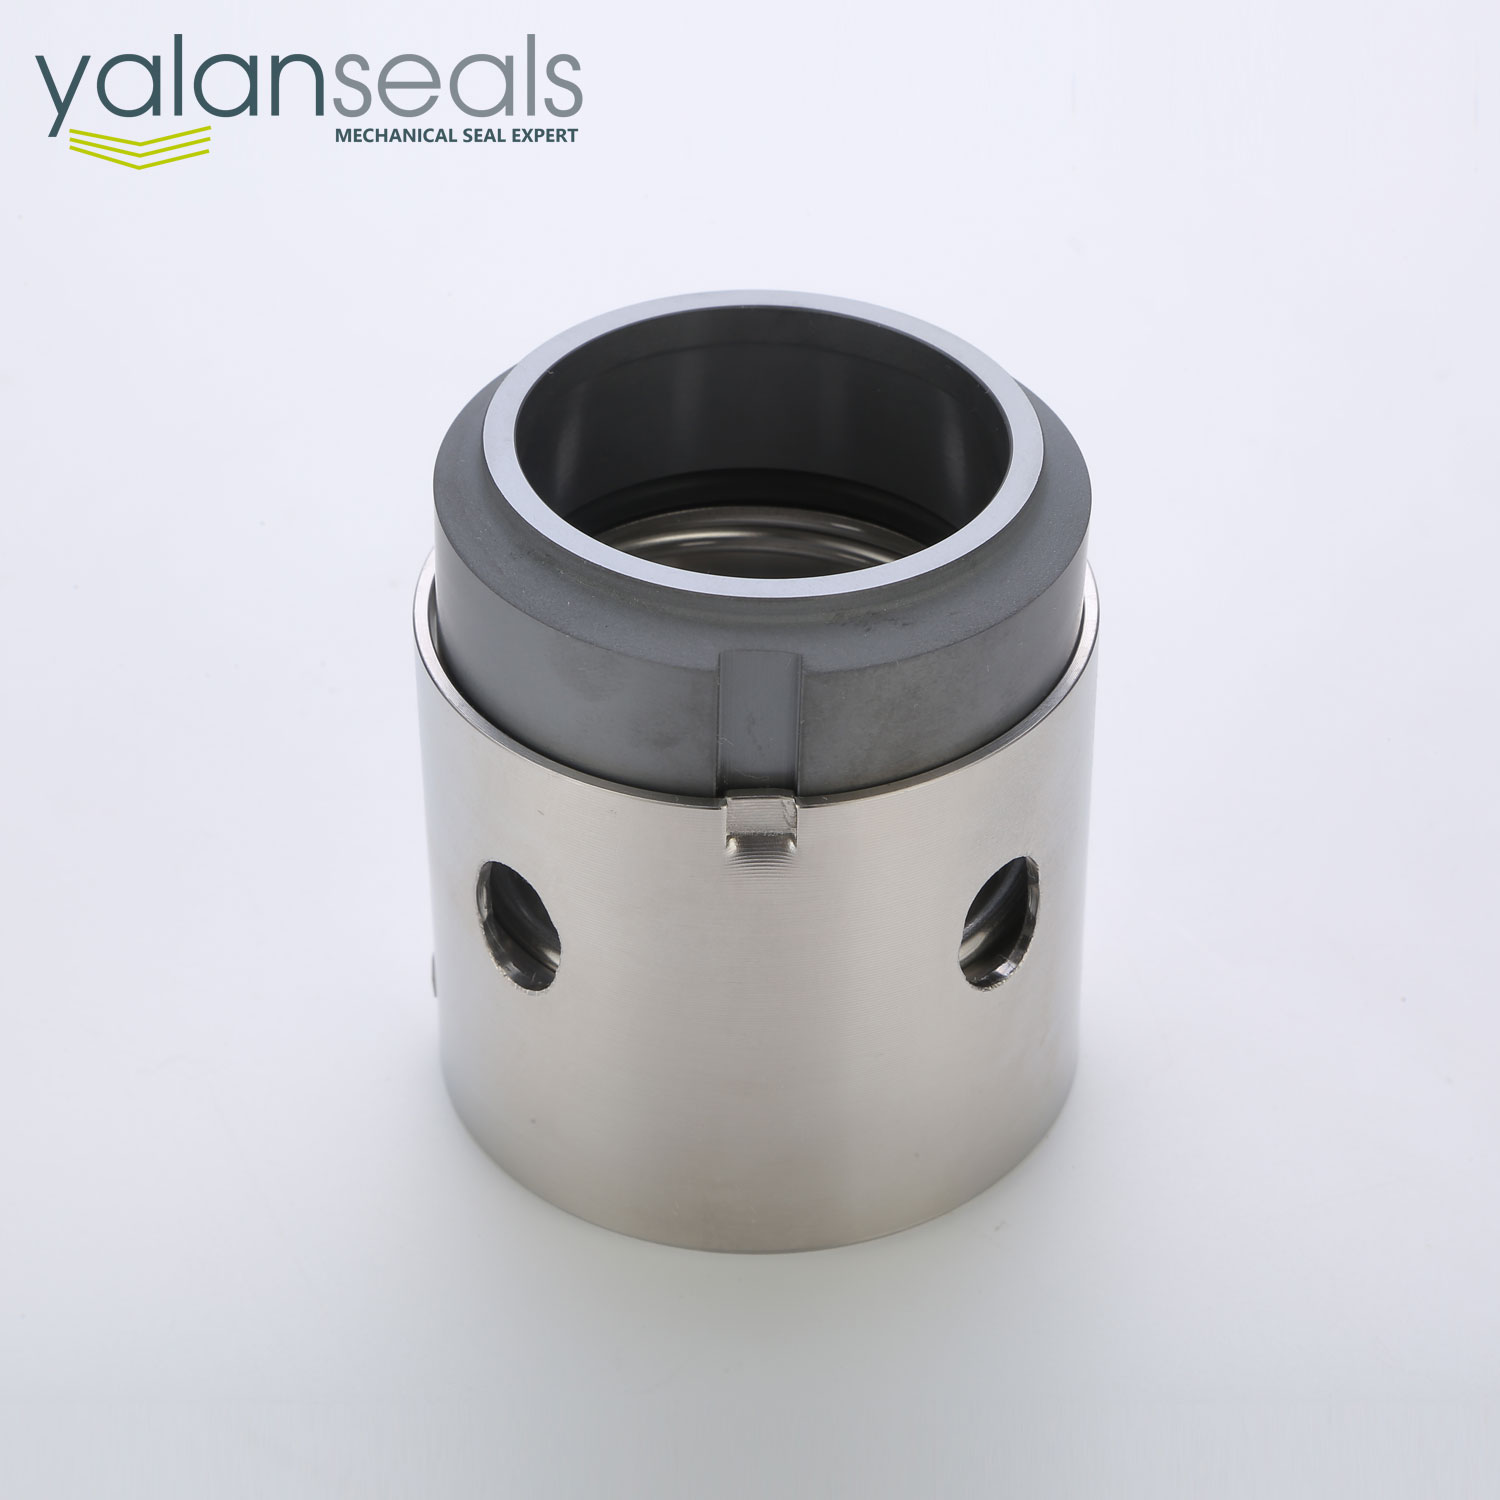 YALAN H76 Single Spring Mechanical Seal for Mixers and Boiler Feed Pumps